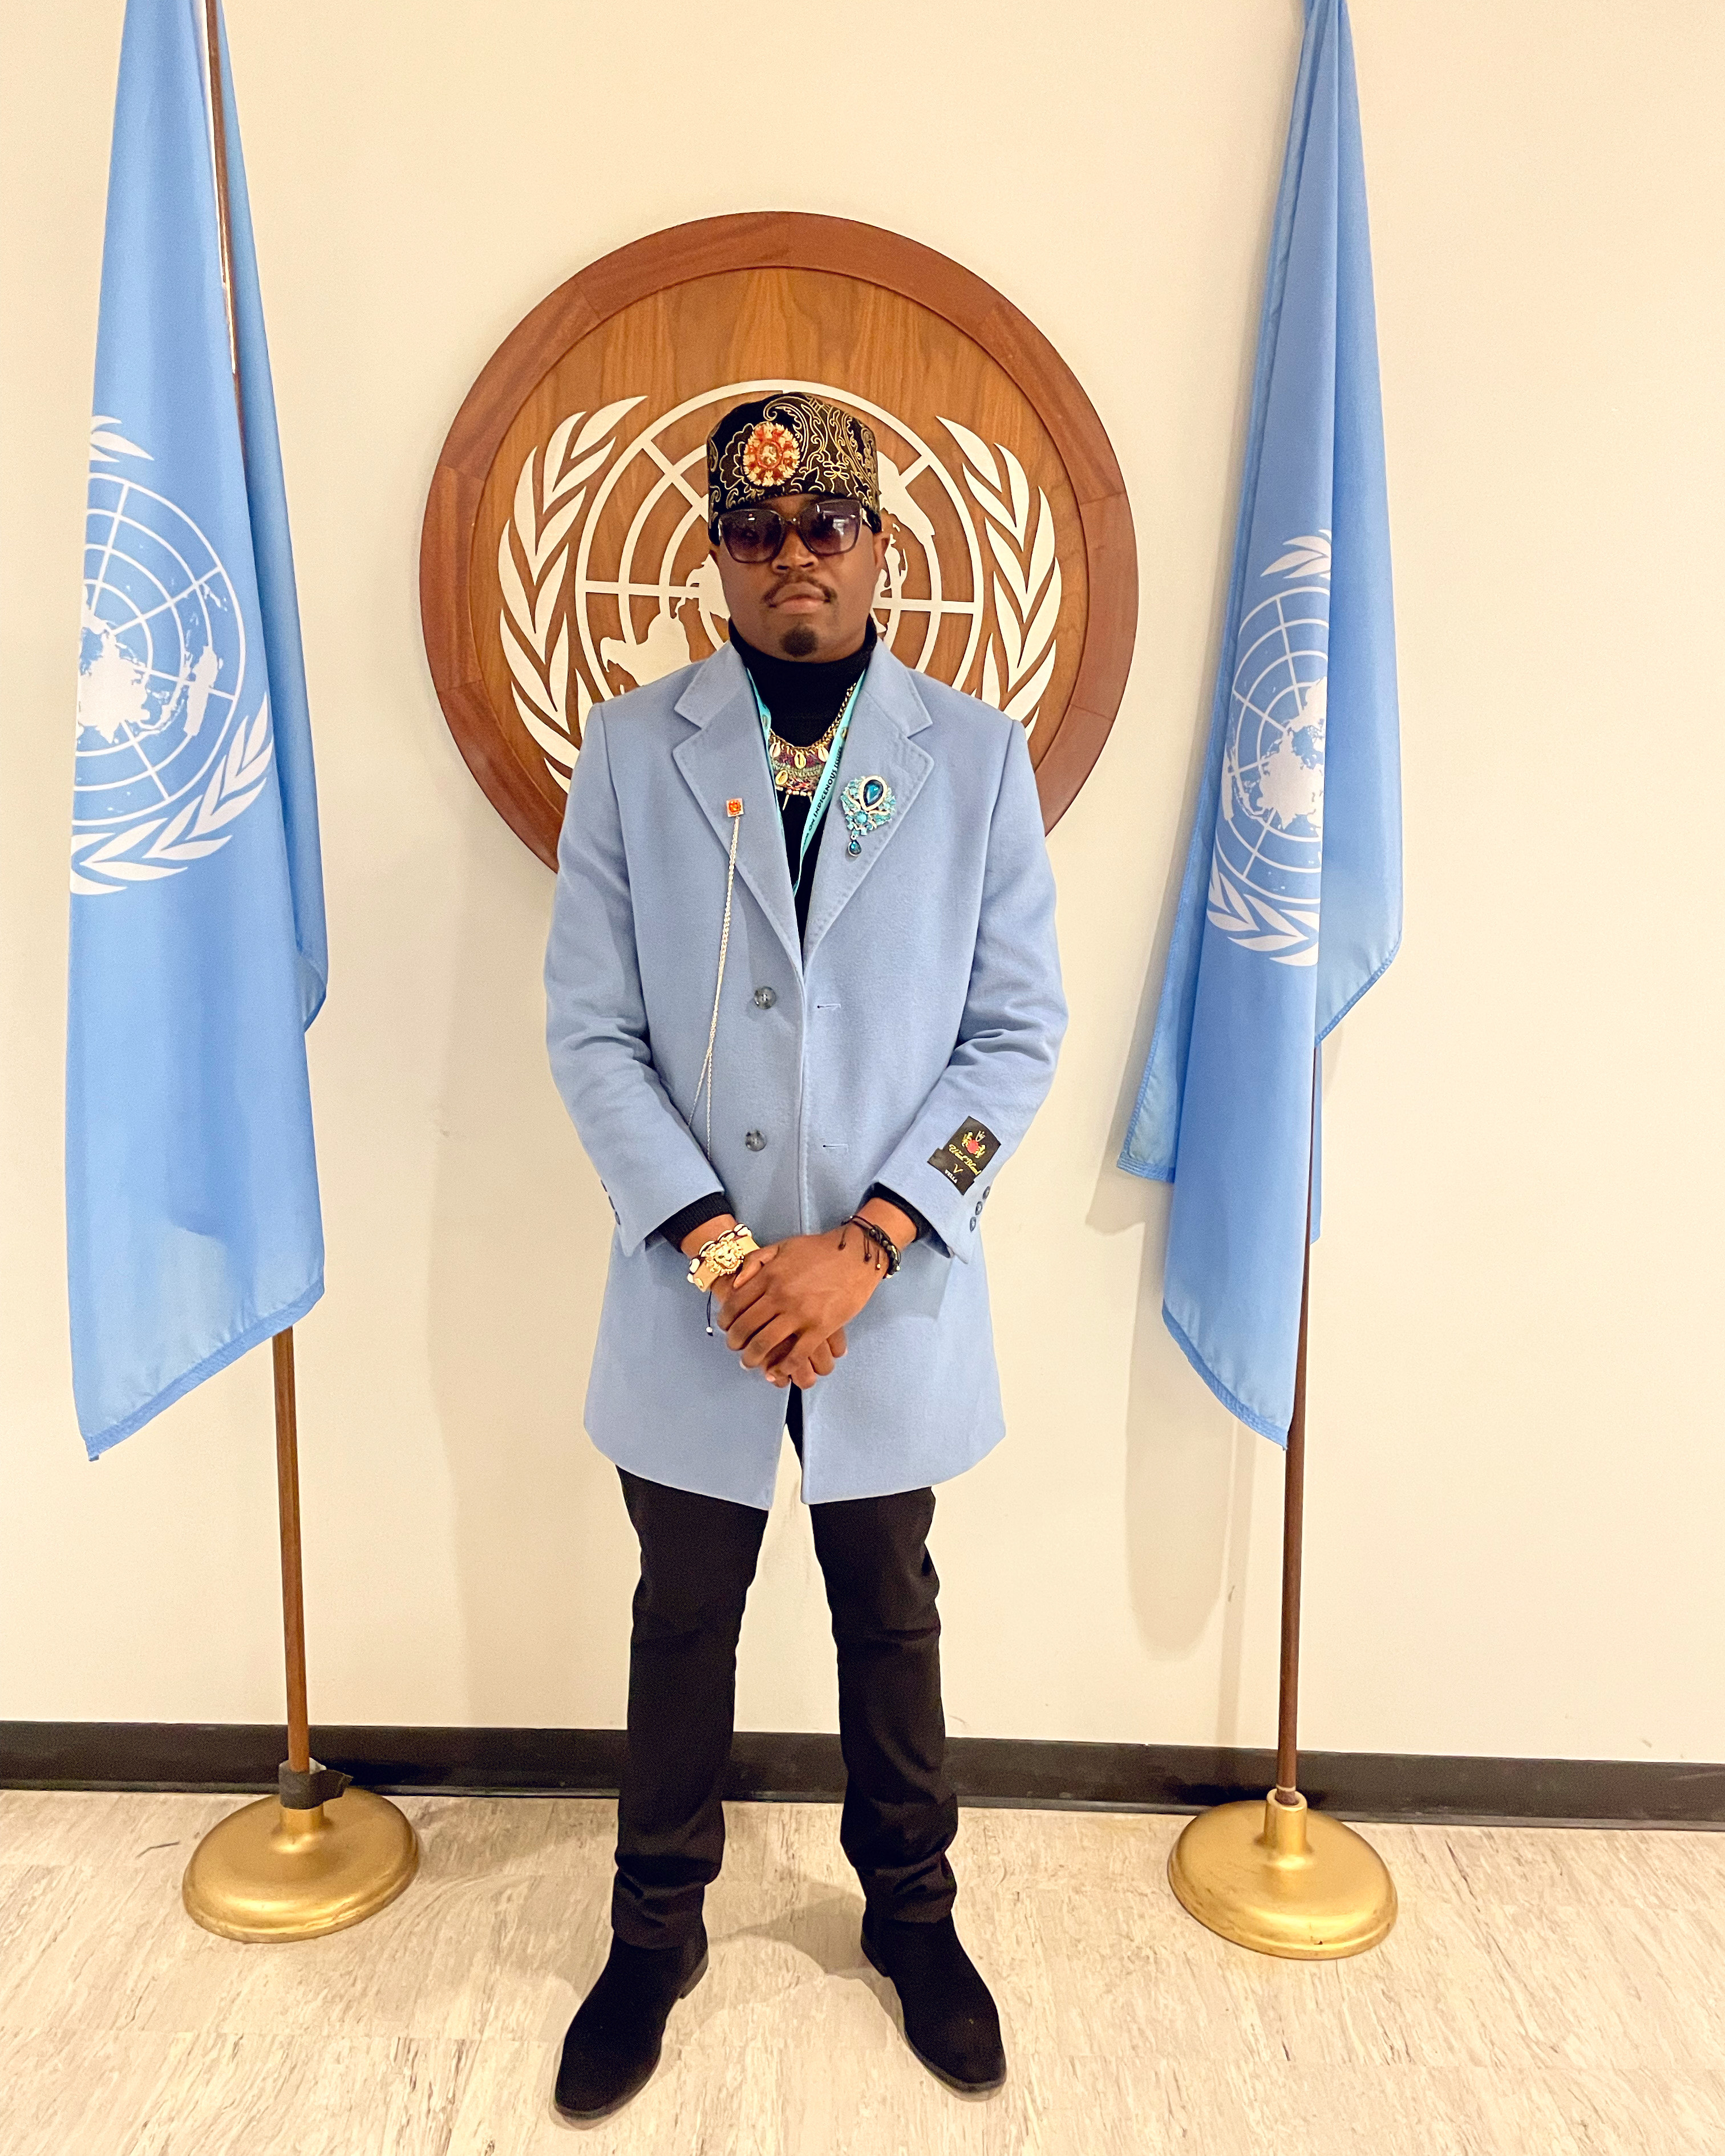 His Royal Highness King Arnold Kufulula President of the Crown Council of Bapindi Congo at United Nations Summit in New York.